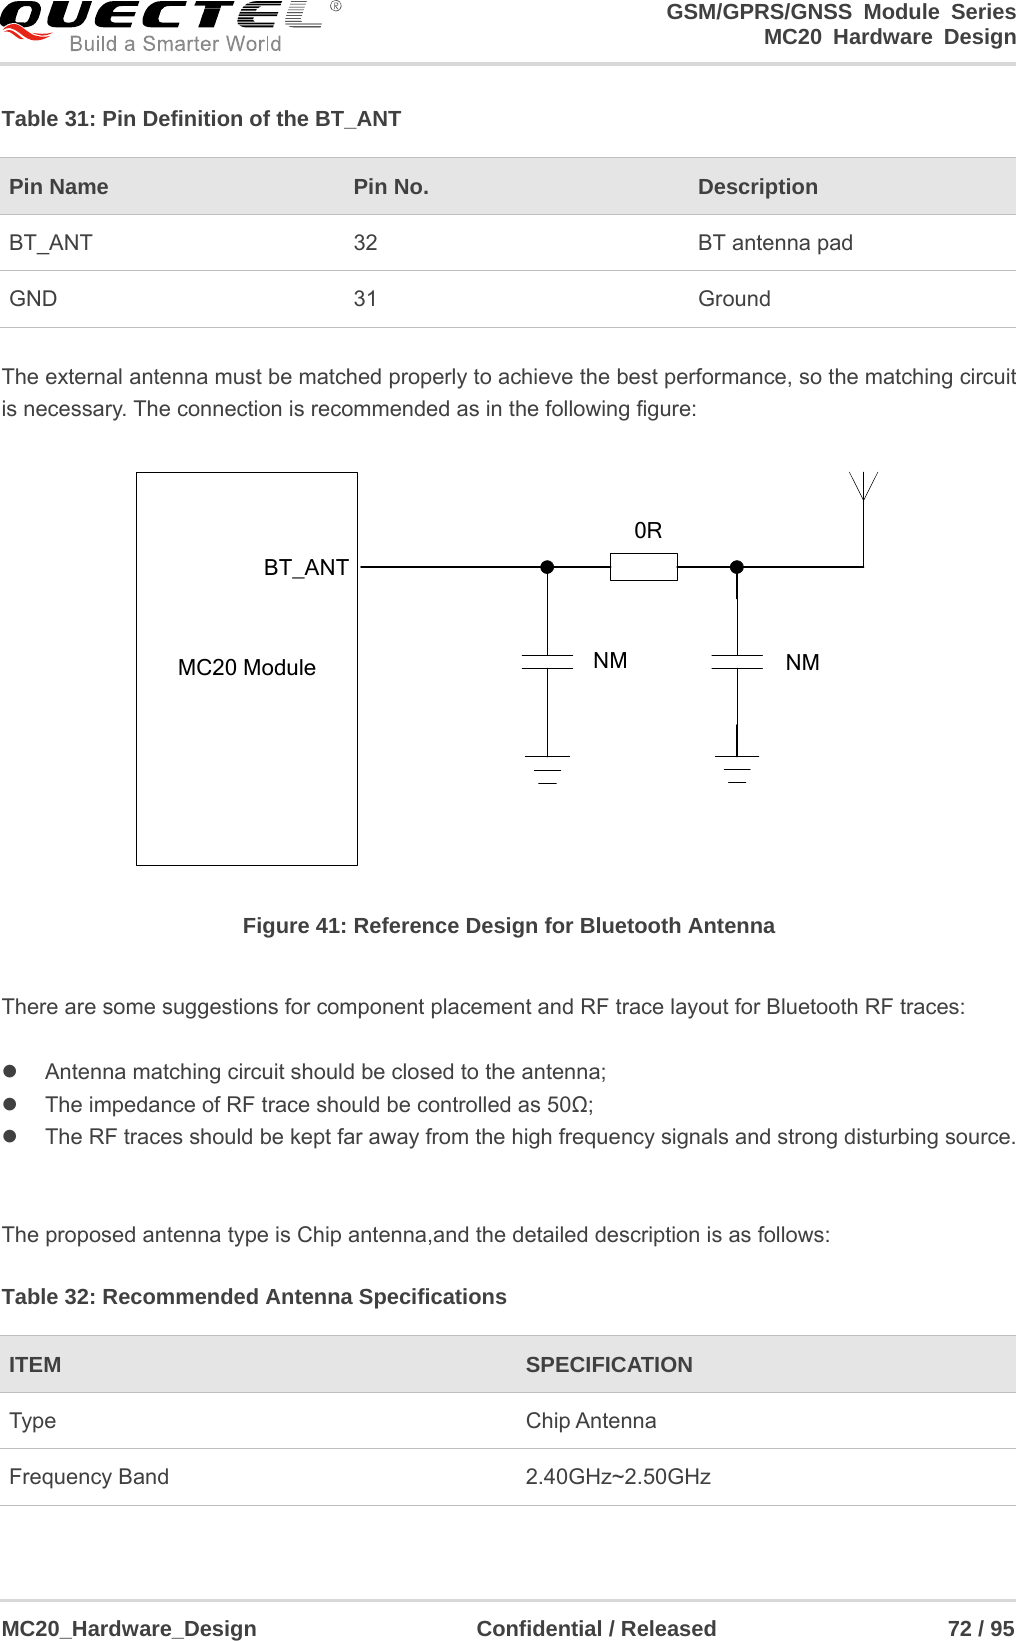                                                                     GSM/GPRS/GNSS Module Series                                                                 MC20 Hardware Design  MC20_Hardware_Design                    Confidential / Released                     72 / 95     Table 31: Pin Definition of the BT_ANT  The external antenna must be matched properly to achieve the best performance, so the matching circuit is necessary. The connection is recommended as in the following figure:  MC20 ModuleBT_ANT0RNM NM Figure 41: Reference Design for Bluetooth Antenna  There are some suggestions for component placement and RF trace layout for Bluetooth RF traces:    Antenna matching circuit should be closed to the antenna;   The impedance of RF trace should be controlled as 50Ω;   The RF traces should be kept far away from the high frequency signals and strong disturbing source.   The proposed antenna type is Chip antenna,and the detailed description is as follows: Table 32: Recommended Antenna Specifications Pin Name    Pin No.  Description BT_ANT  32  BT antenna pad GND 31  Ground ITEM  SPECIFICATION Type Chip Antenna Frequency Band  2.40GHz~2.50GHz 